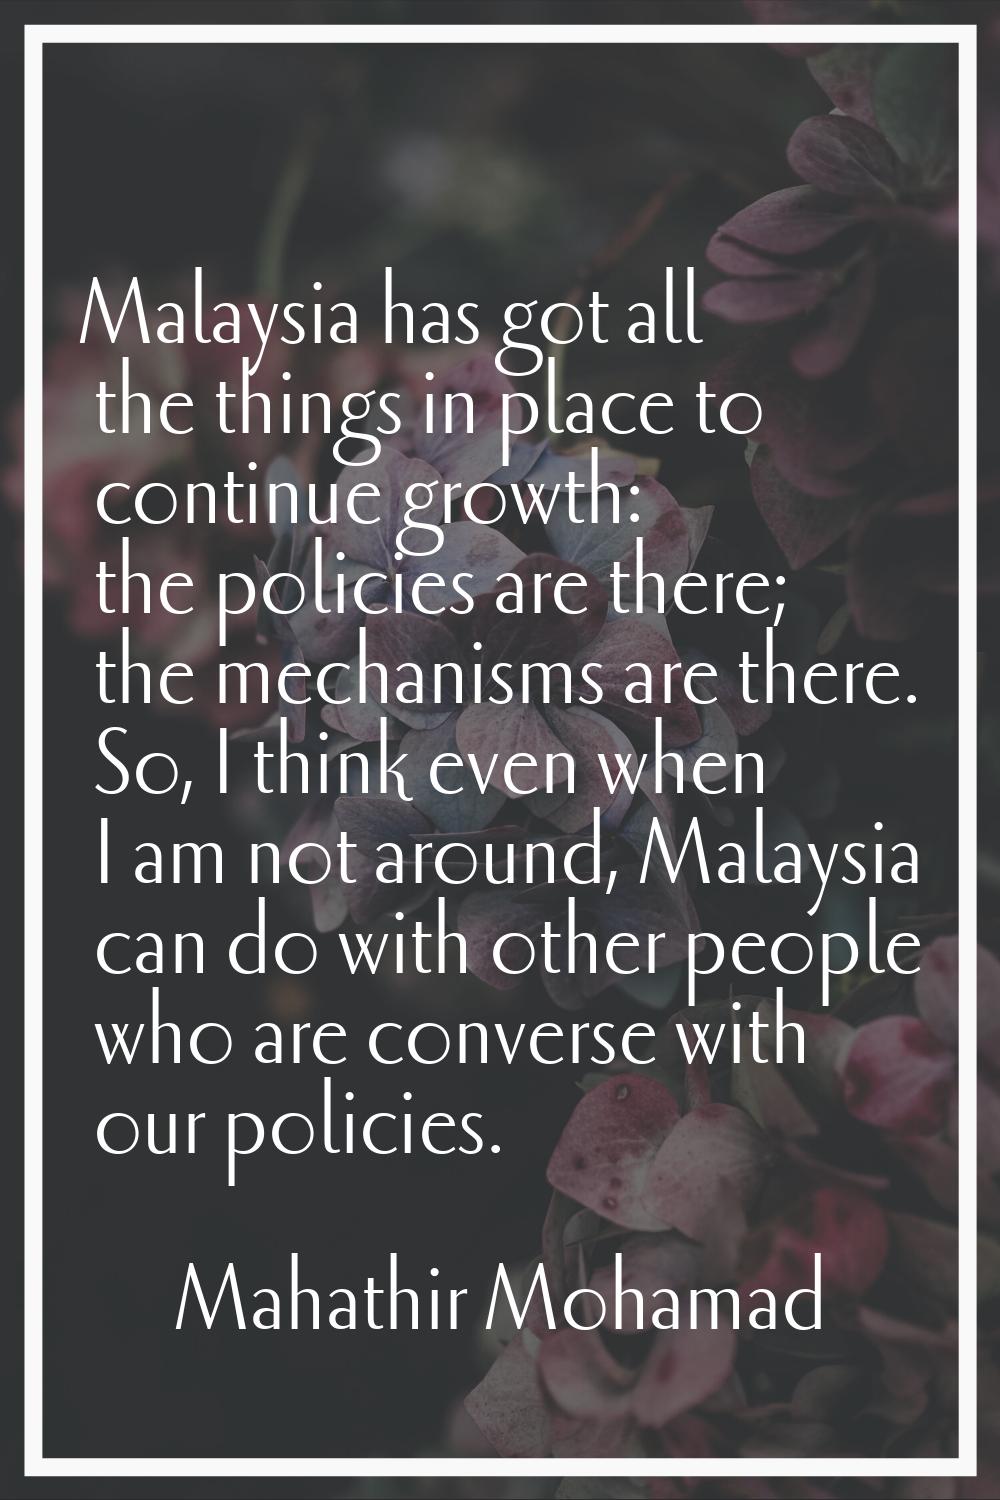 Malaysia has got all the things in place to continue growth: the policies are there; the mechanisms